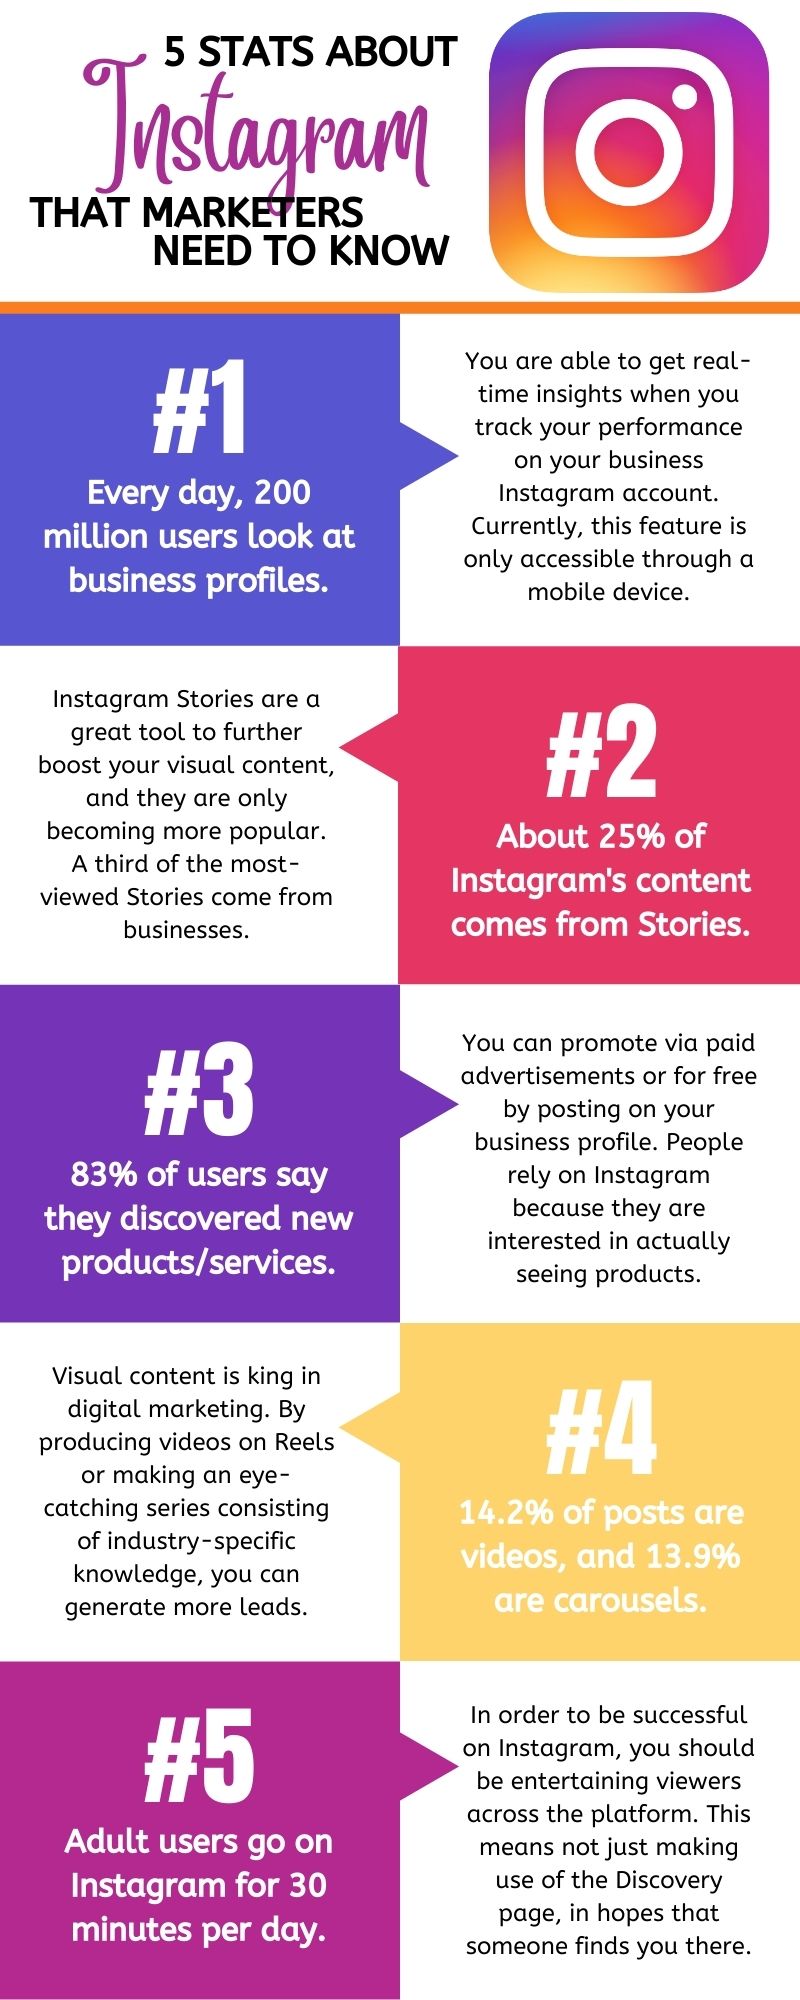 Stats About Instagram That Marketers Need to Know